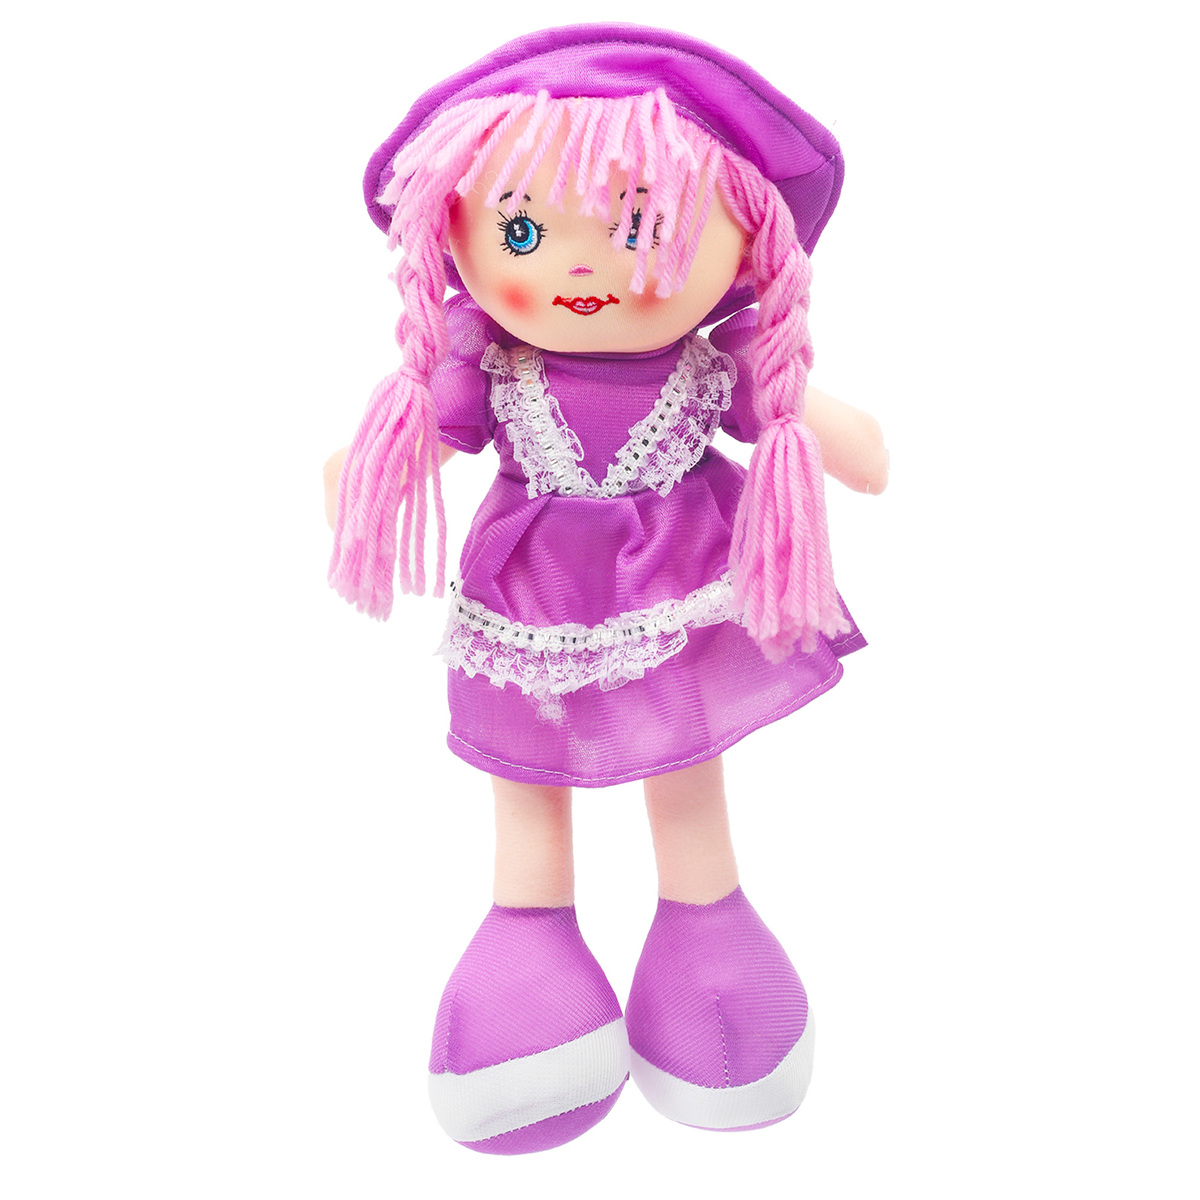 Fabiola Candy Doll With Sound 37cm 646-7-3 Assorted